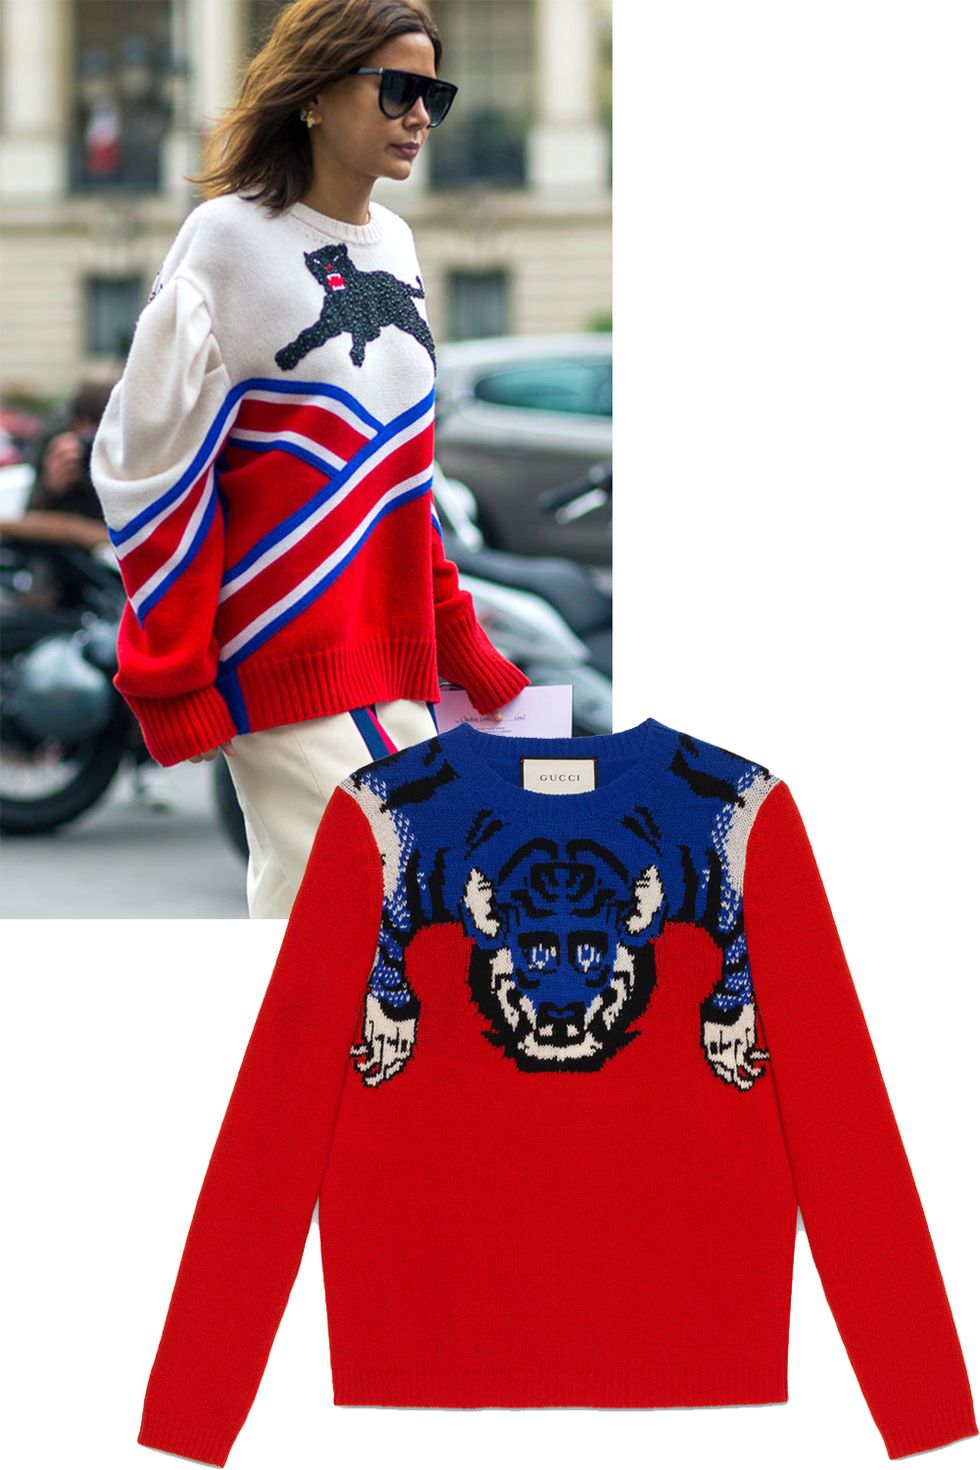 <p>The eighties revival edged its way in, including loud and oversized sweaters.&nbsp;</p><p><em data-redactor-tag="em" data-verified="redactor">Gucci sweater, $1,290, <strong data-redactor-tag="strong" data-verified="redactor"><a href="https://shop.harpersbazaar.com/designers/g/gucci/merino-tiger-sweater-9646.html" target="_blank">shopBAZAAR.com</a></strong>.&nbsp;&nbsp;</em></p>